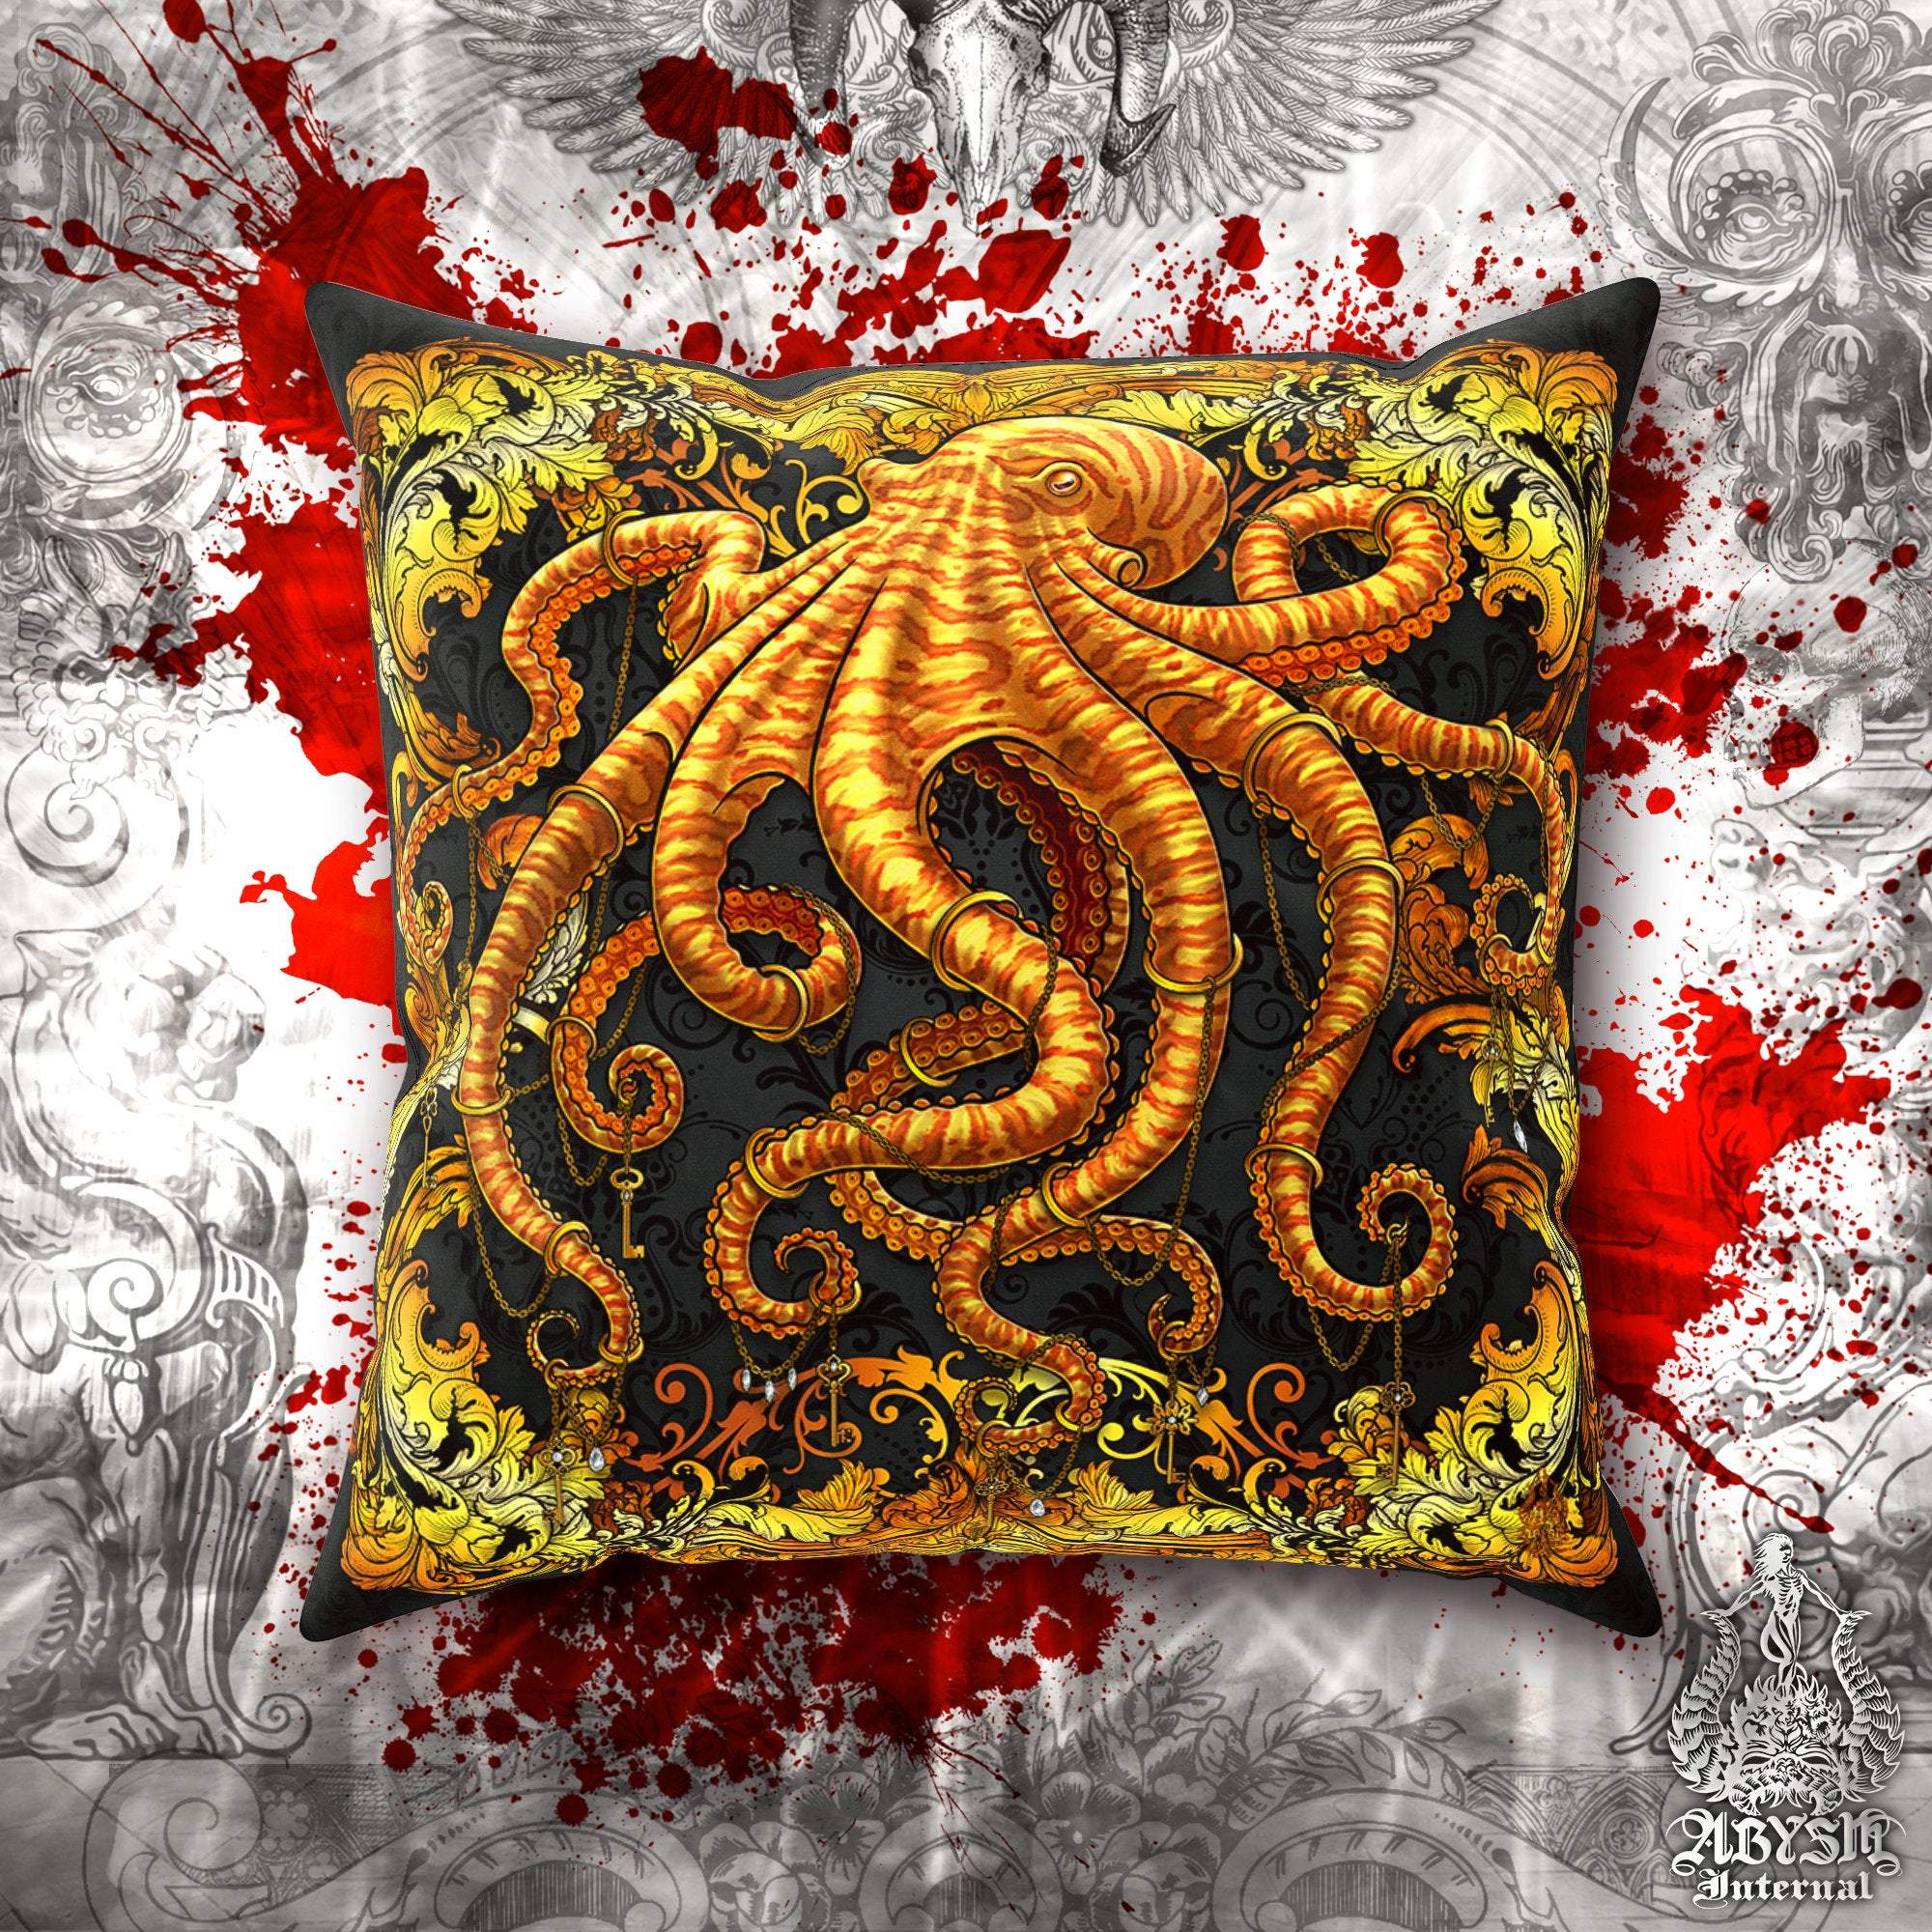 Octopus Throw Pillow, Decorative Accent Cushion, Beach Decor, Indie and Eclectic Design, Alternative Home - Gold & Black - Abysm Internal